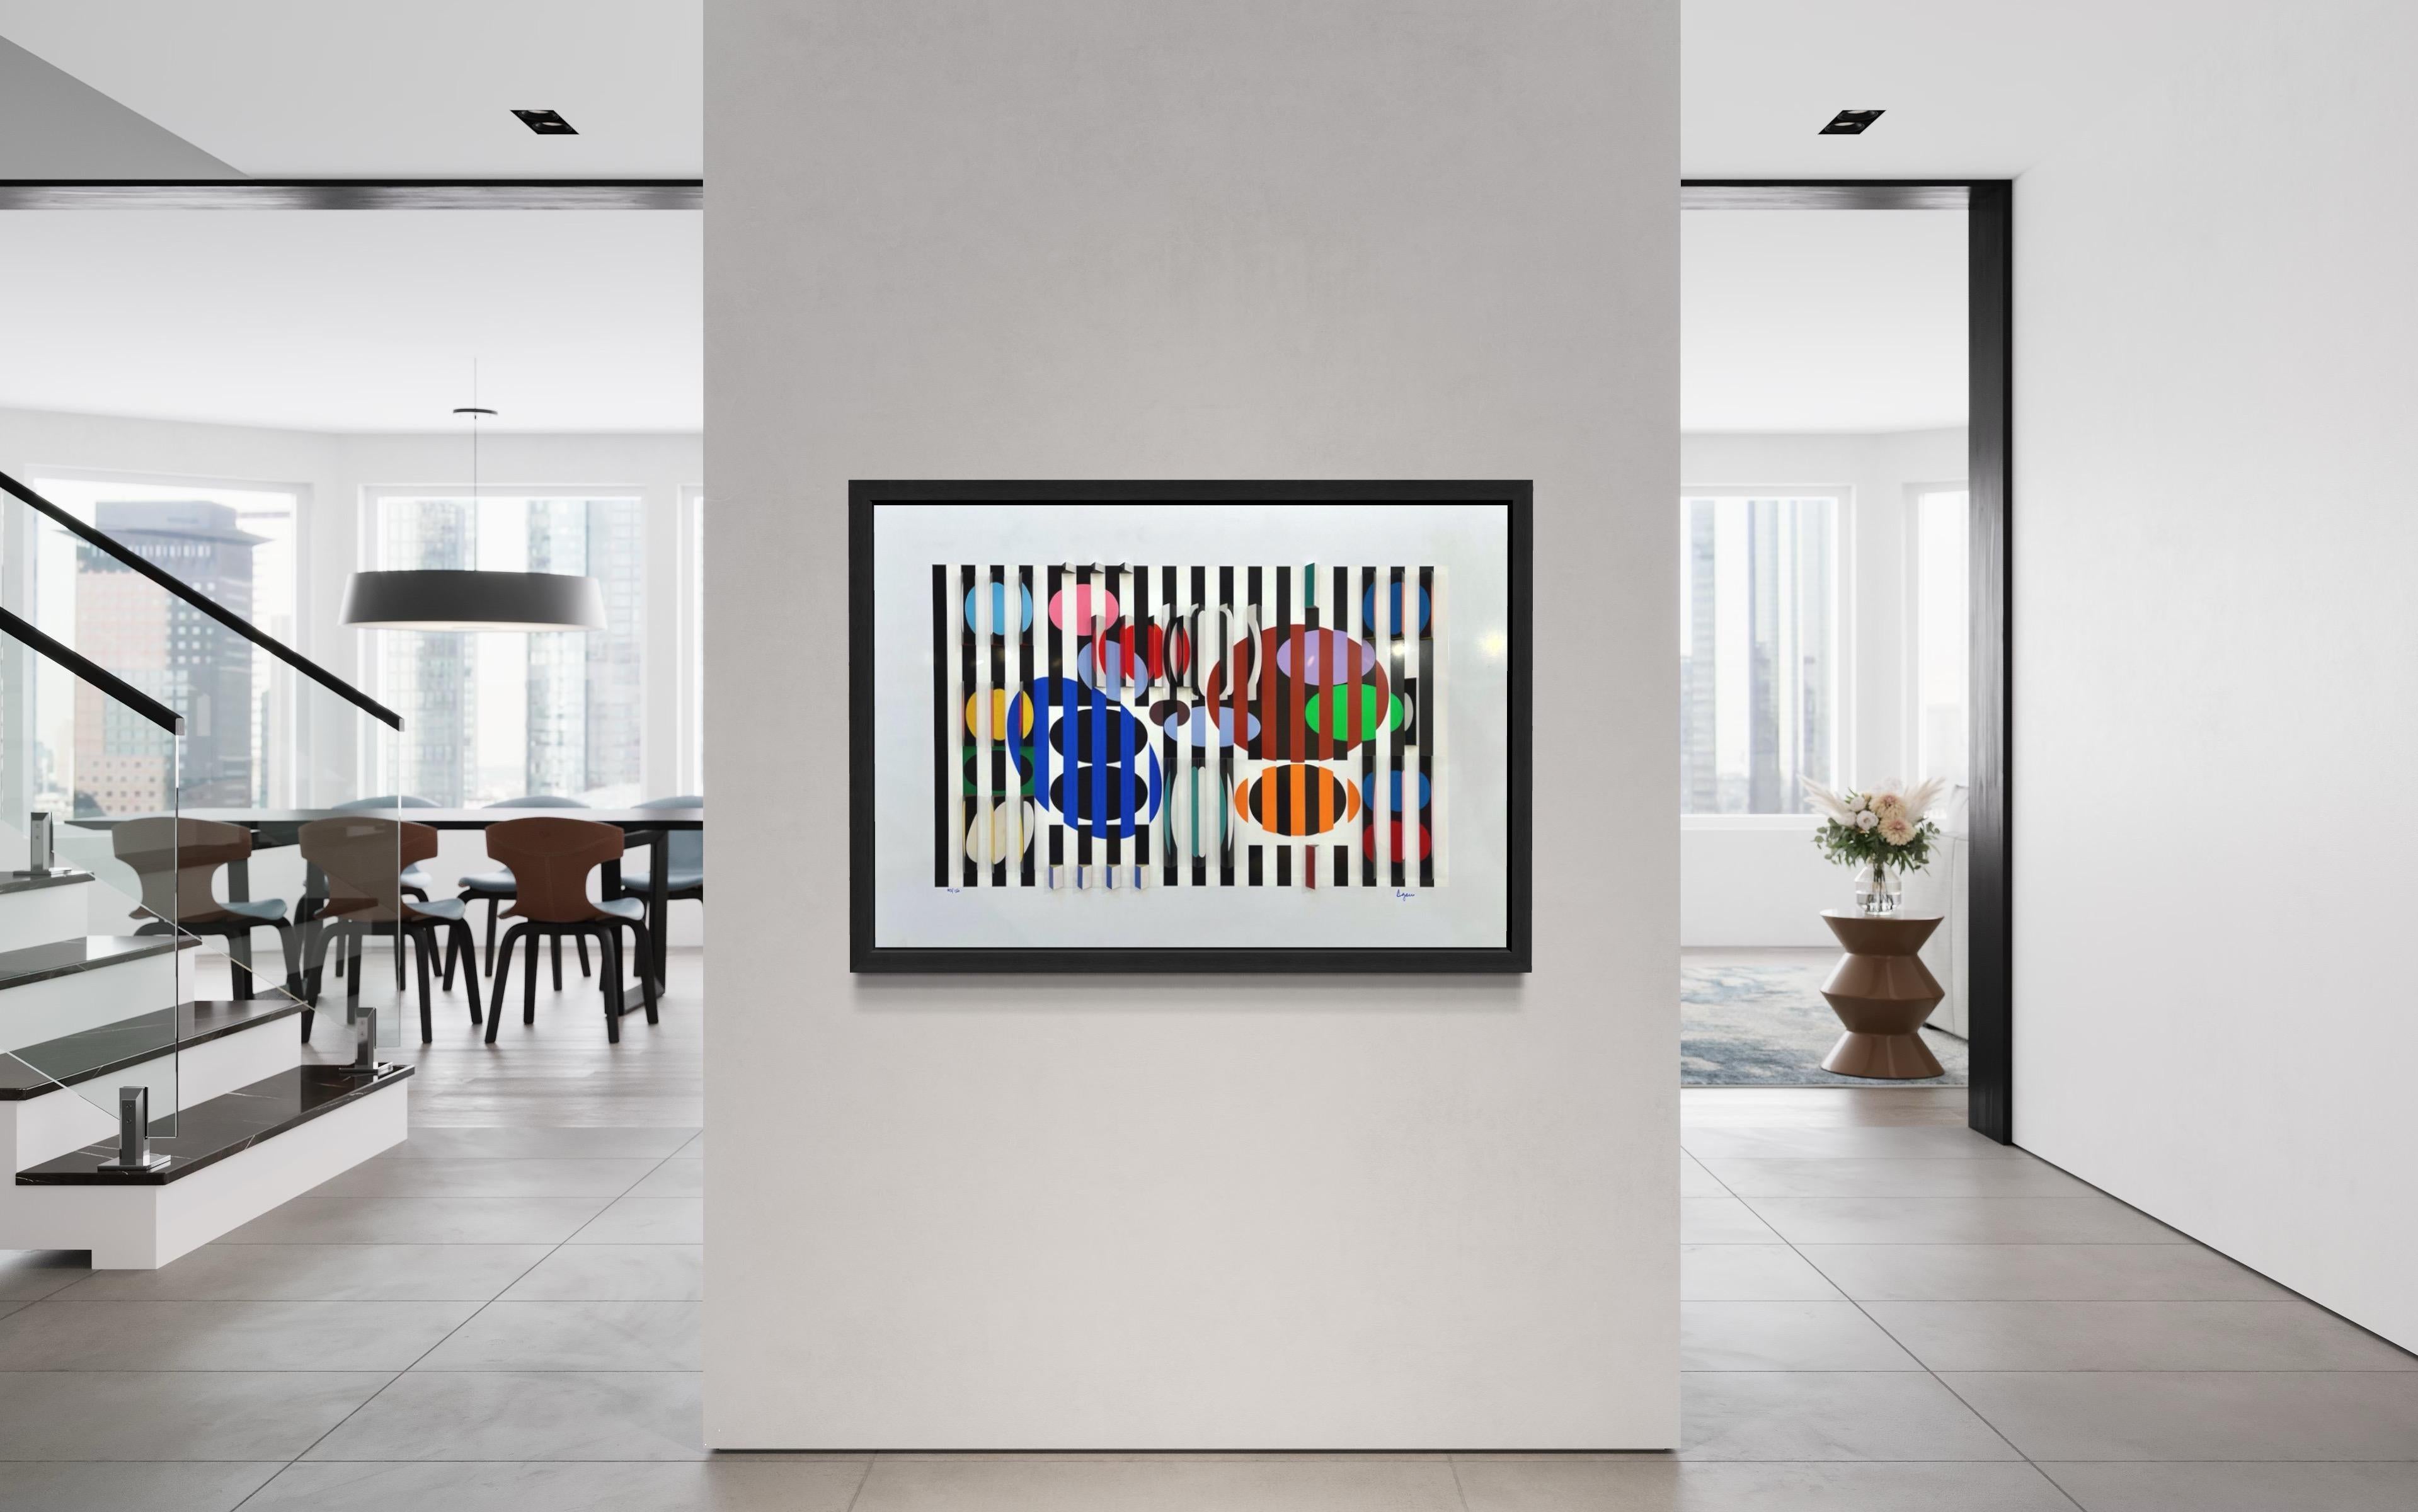 3D Kinetic work by Yaacov Agam.
Homage to Einstein’s Time Formula. First viewing the work in 2D from the front, the viewer is then exposed to a third dimension as he moves.
Signed by the artist, edition of 150